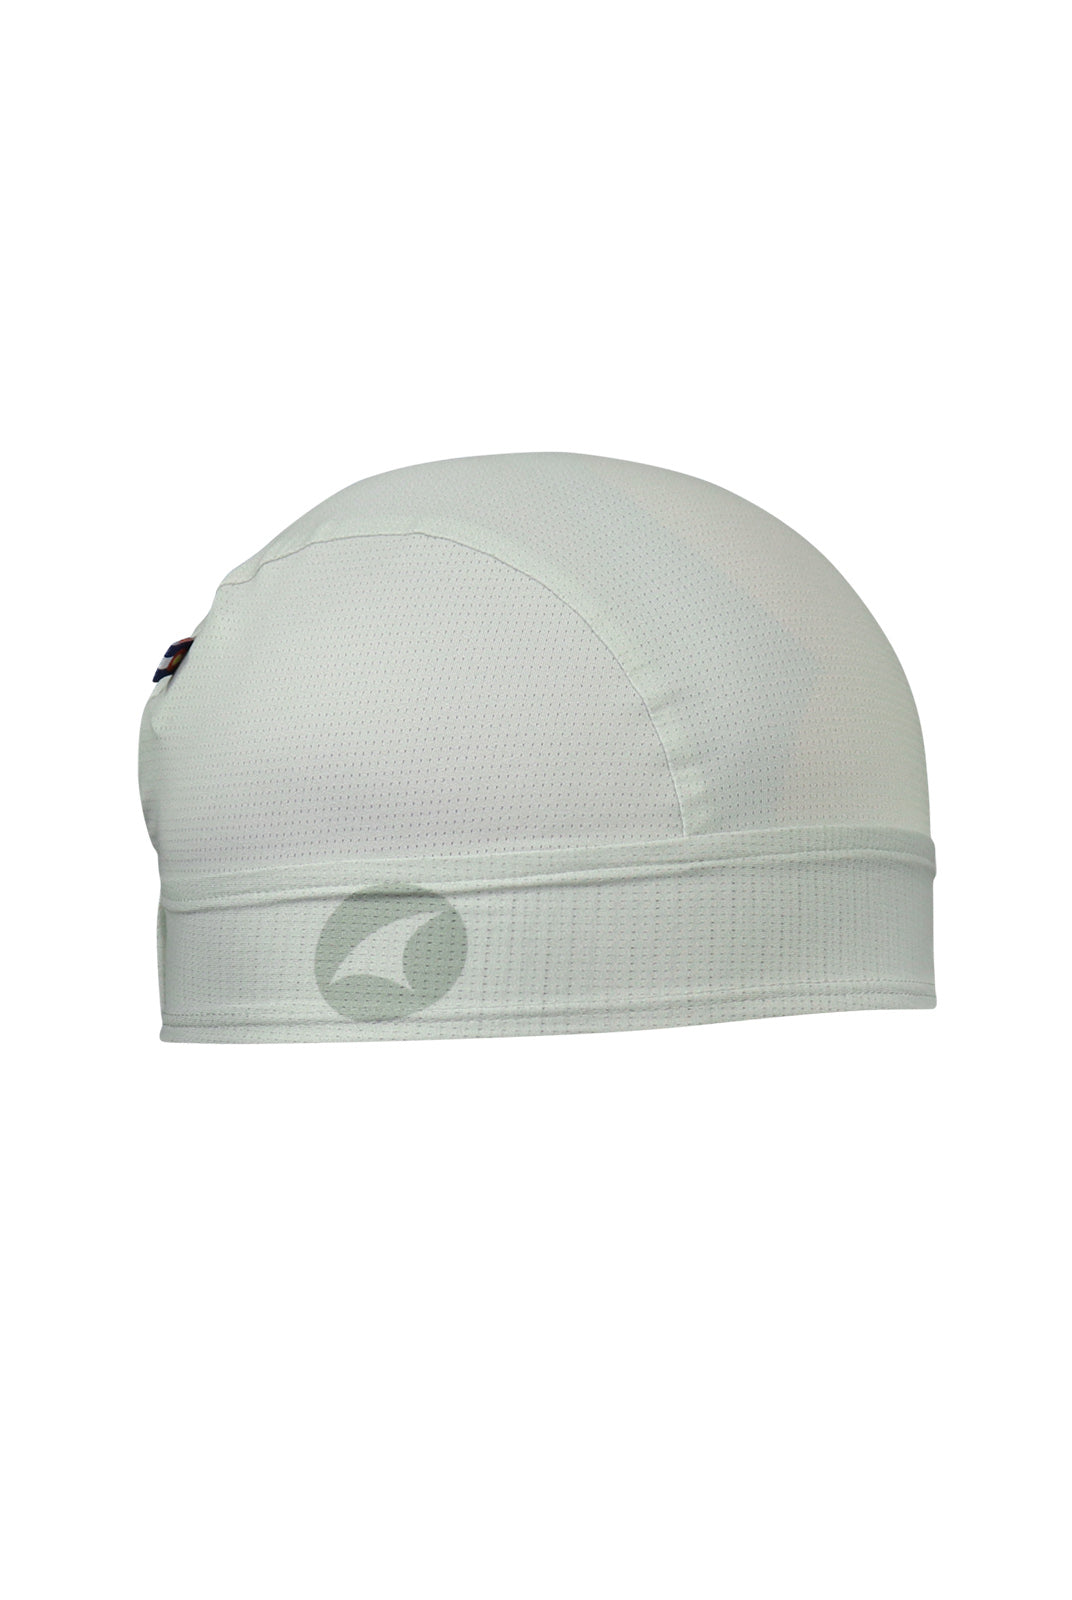 White Cycling Summer Skull Cap - Right View